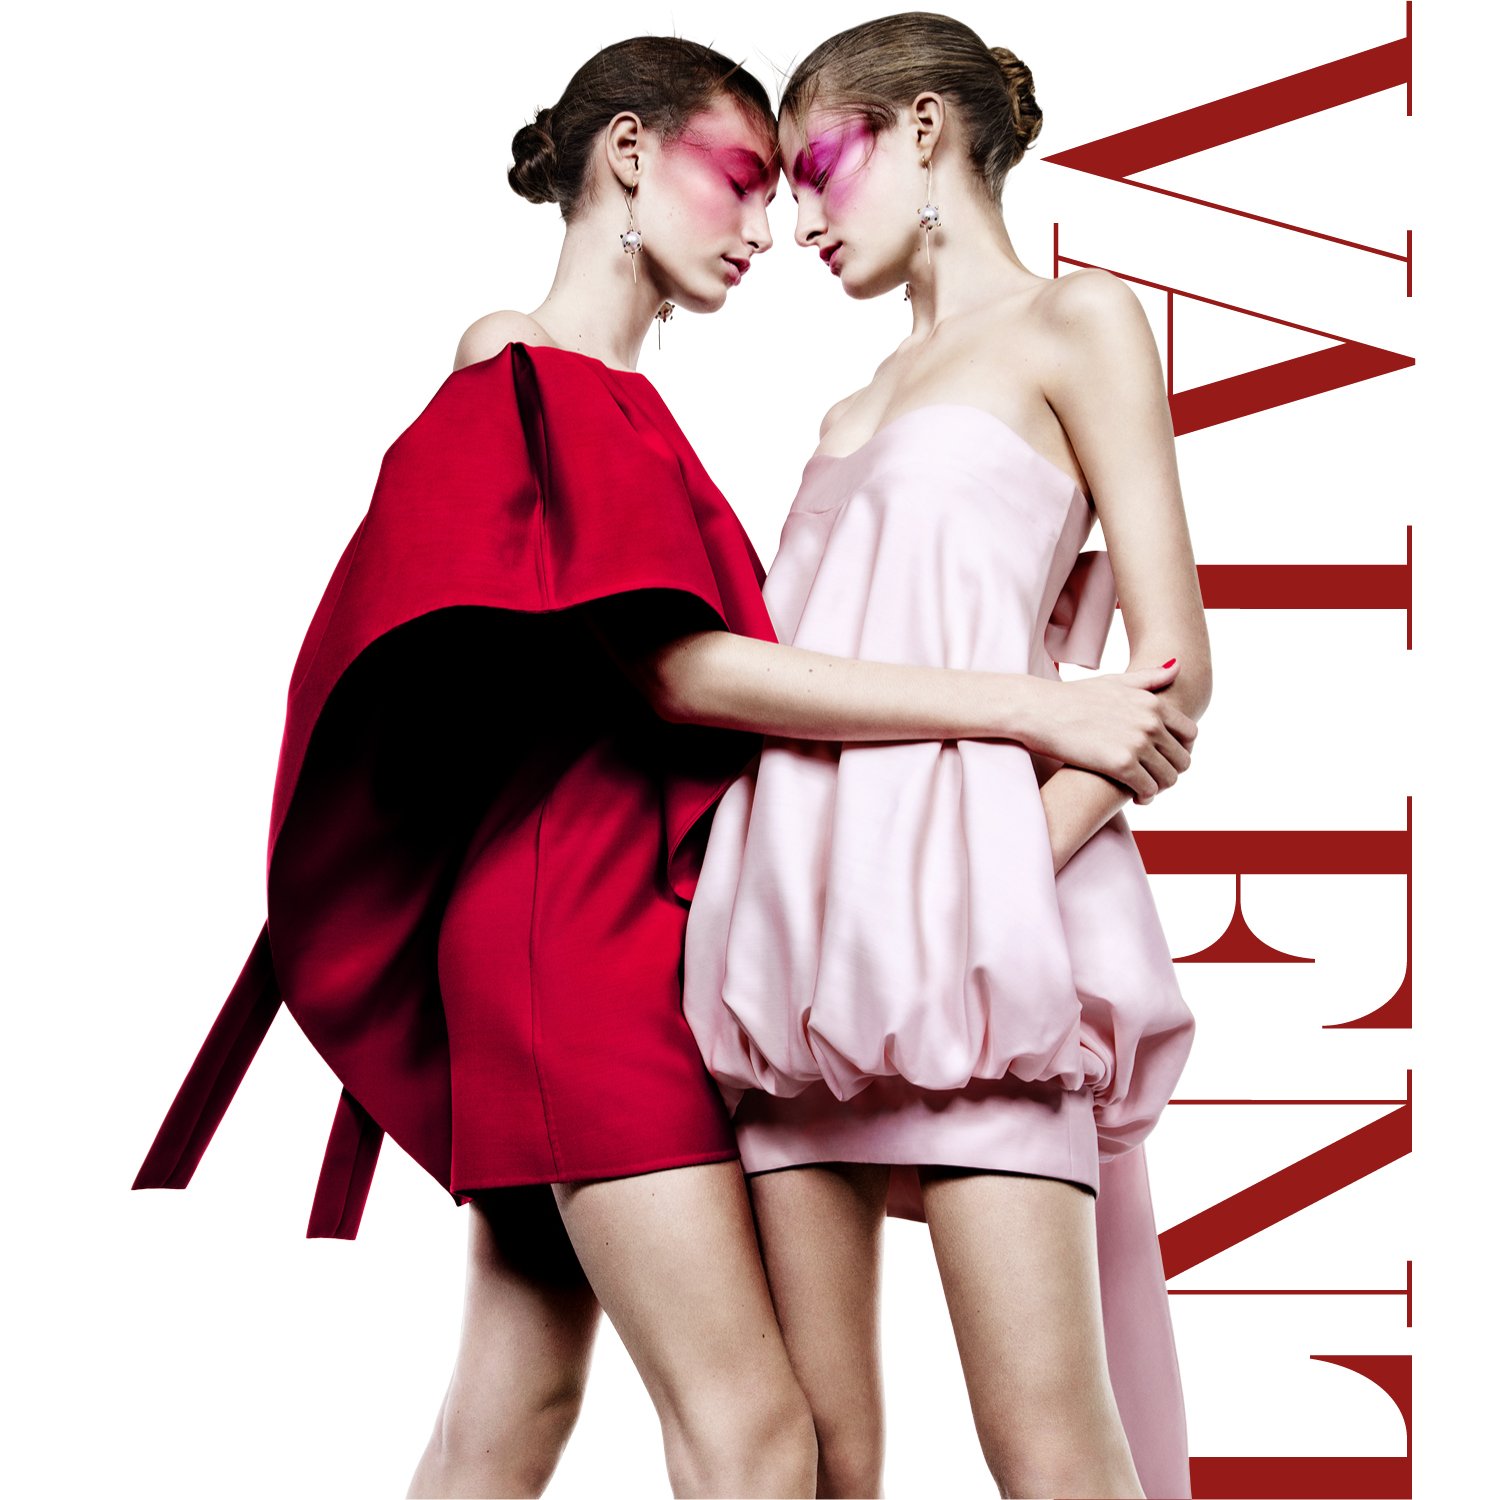 "What's your color? Valentino red or feminine pink? The #ValentinoSS18 #AdvCampaign gives you options with these two #VeryValentinolooks worn by #FeliceNova #AuroraTalarico. https://t.co/orFI6MBNnV" / Twitter